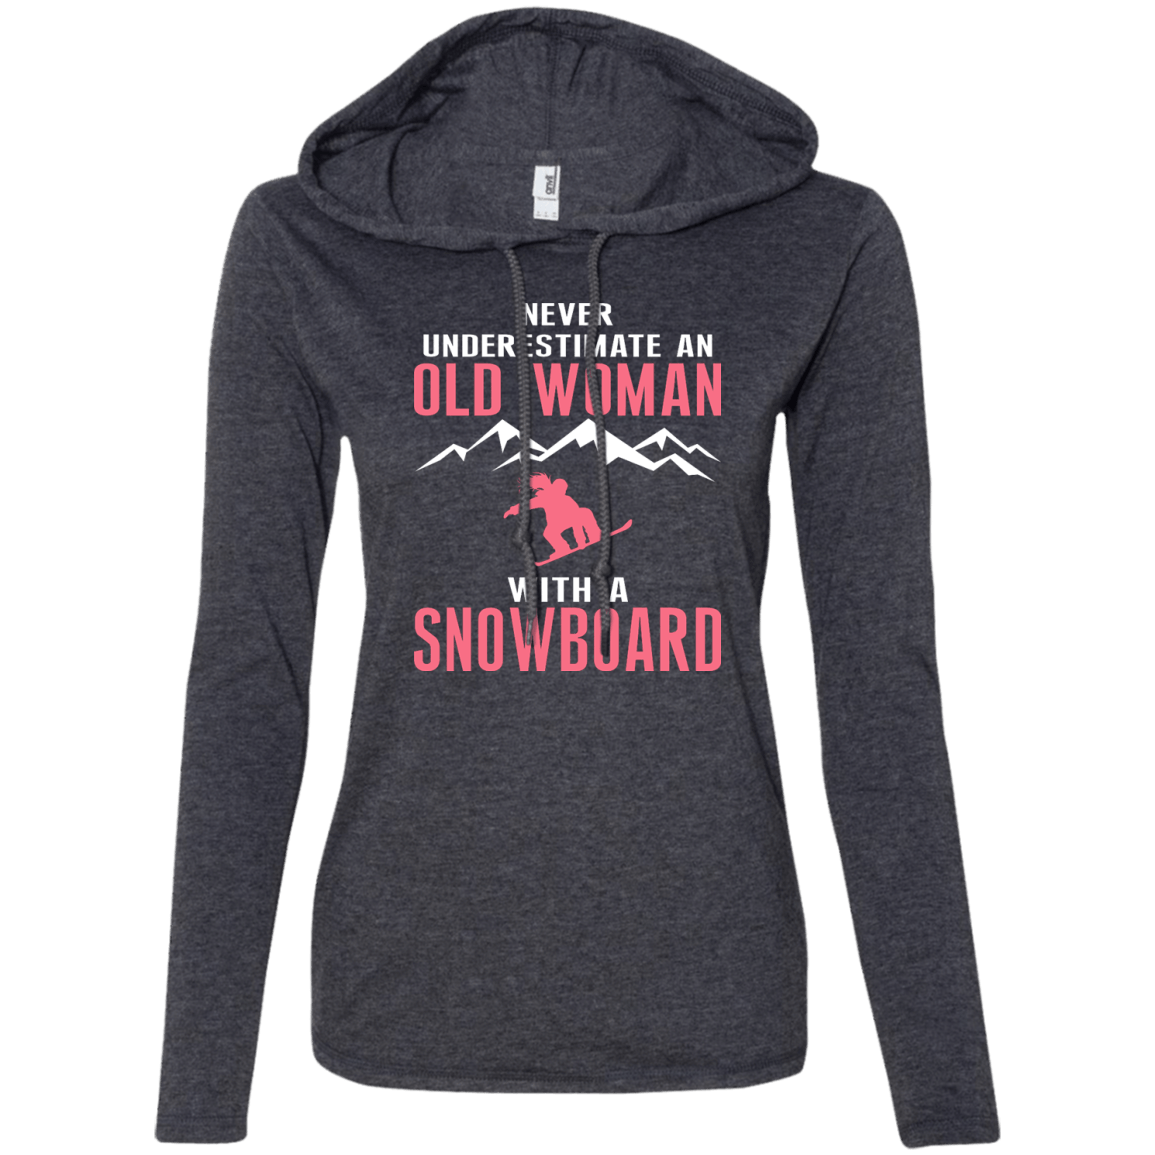 Never Underestimate An Old Woman With A Snowboard Hoodies - Powderaddicts